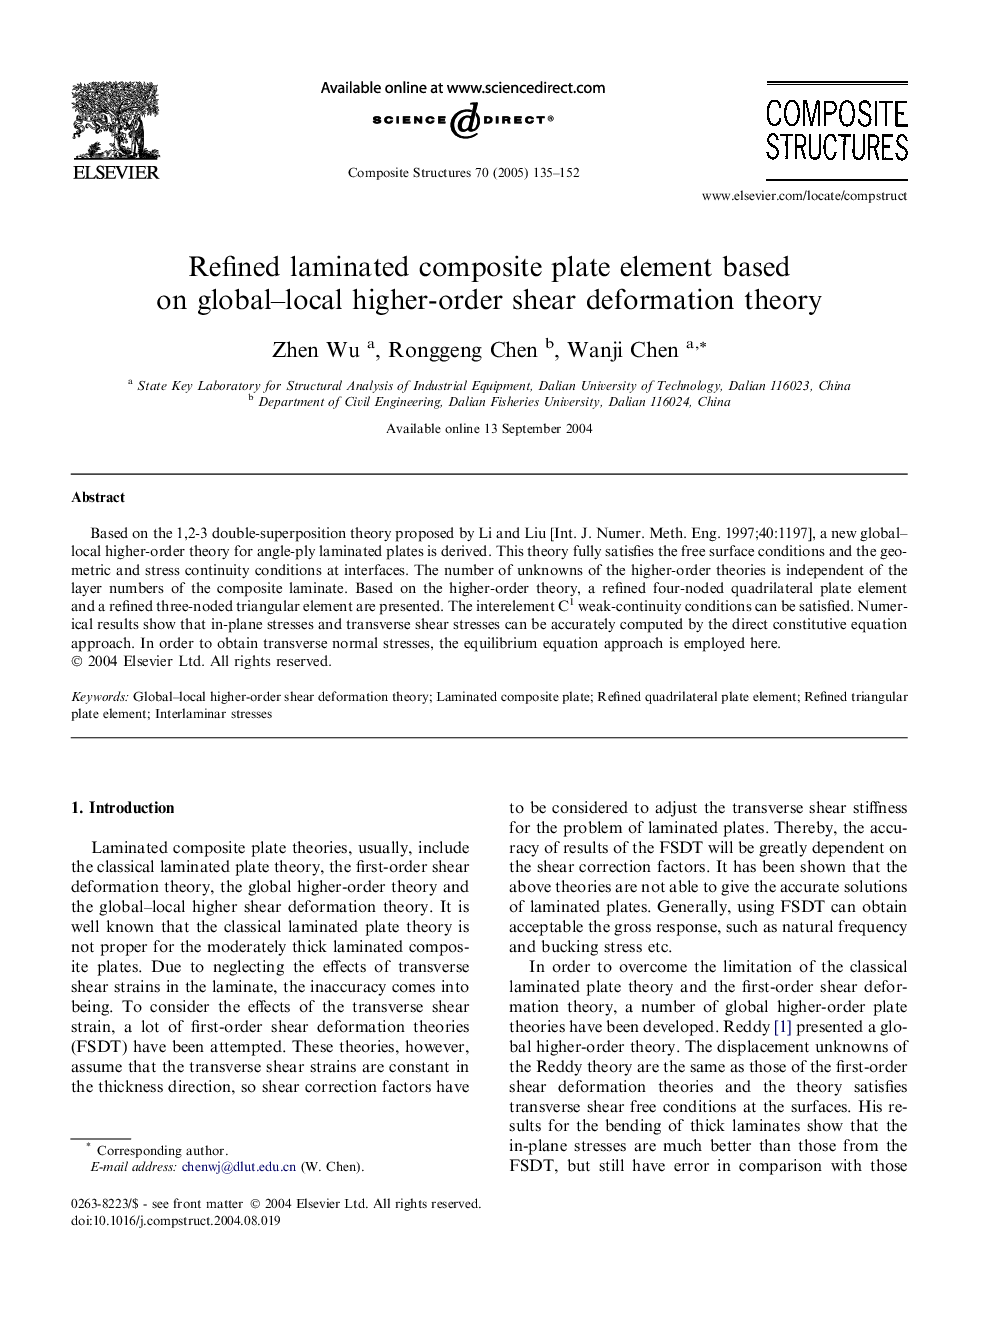 Refined laminated composite plate element based on global-local higher-order shear deformation theory